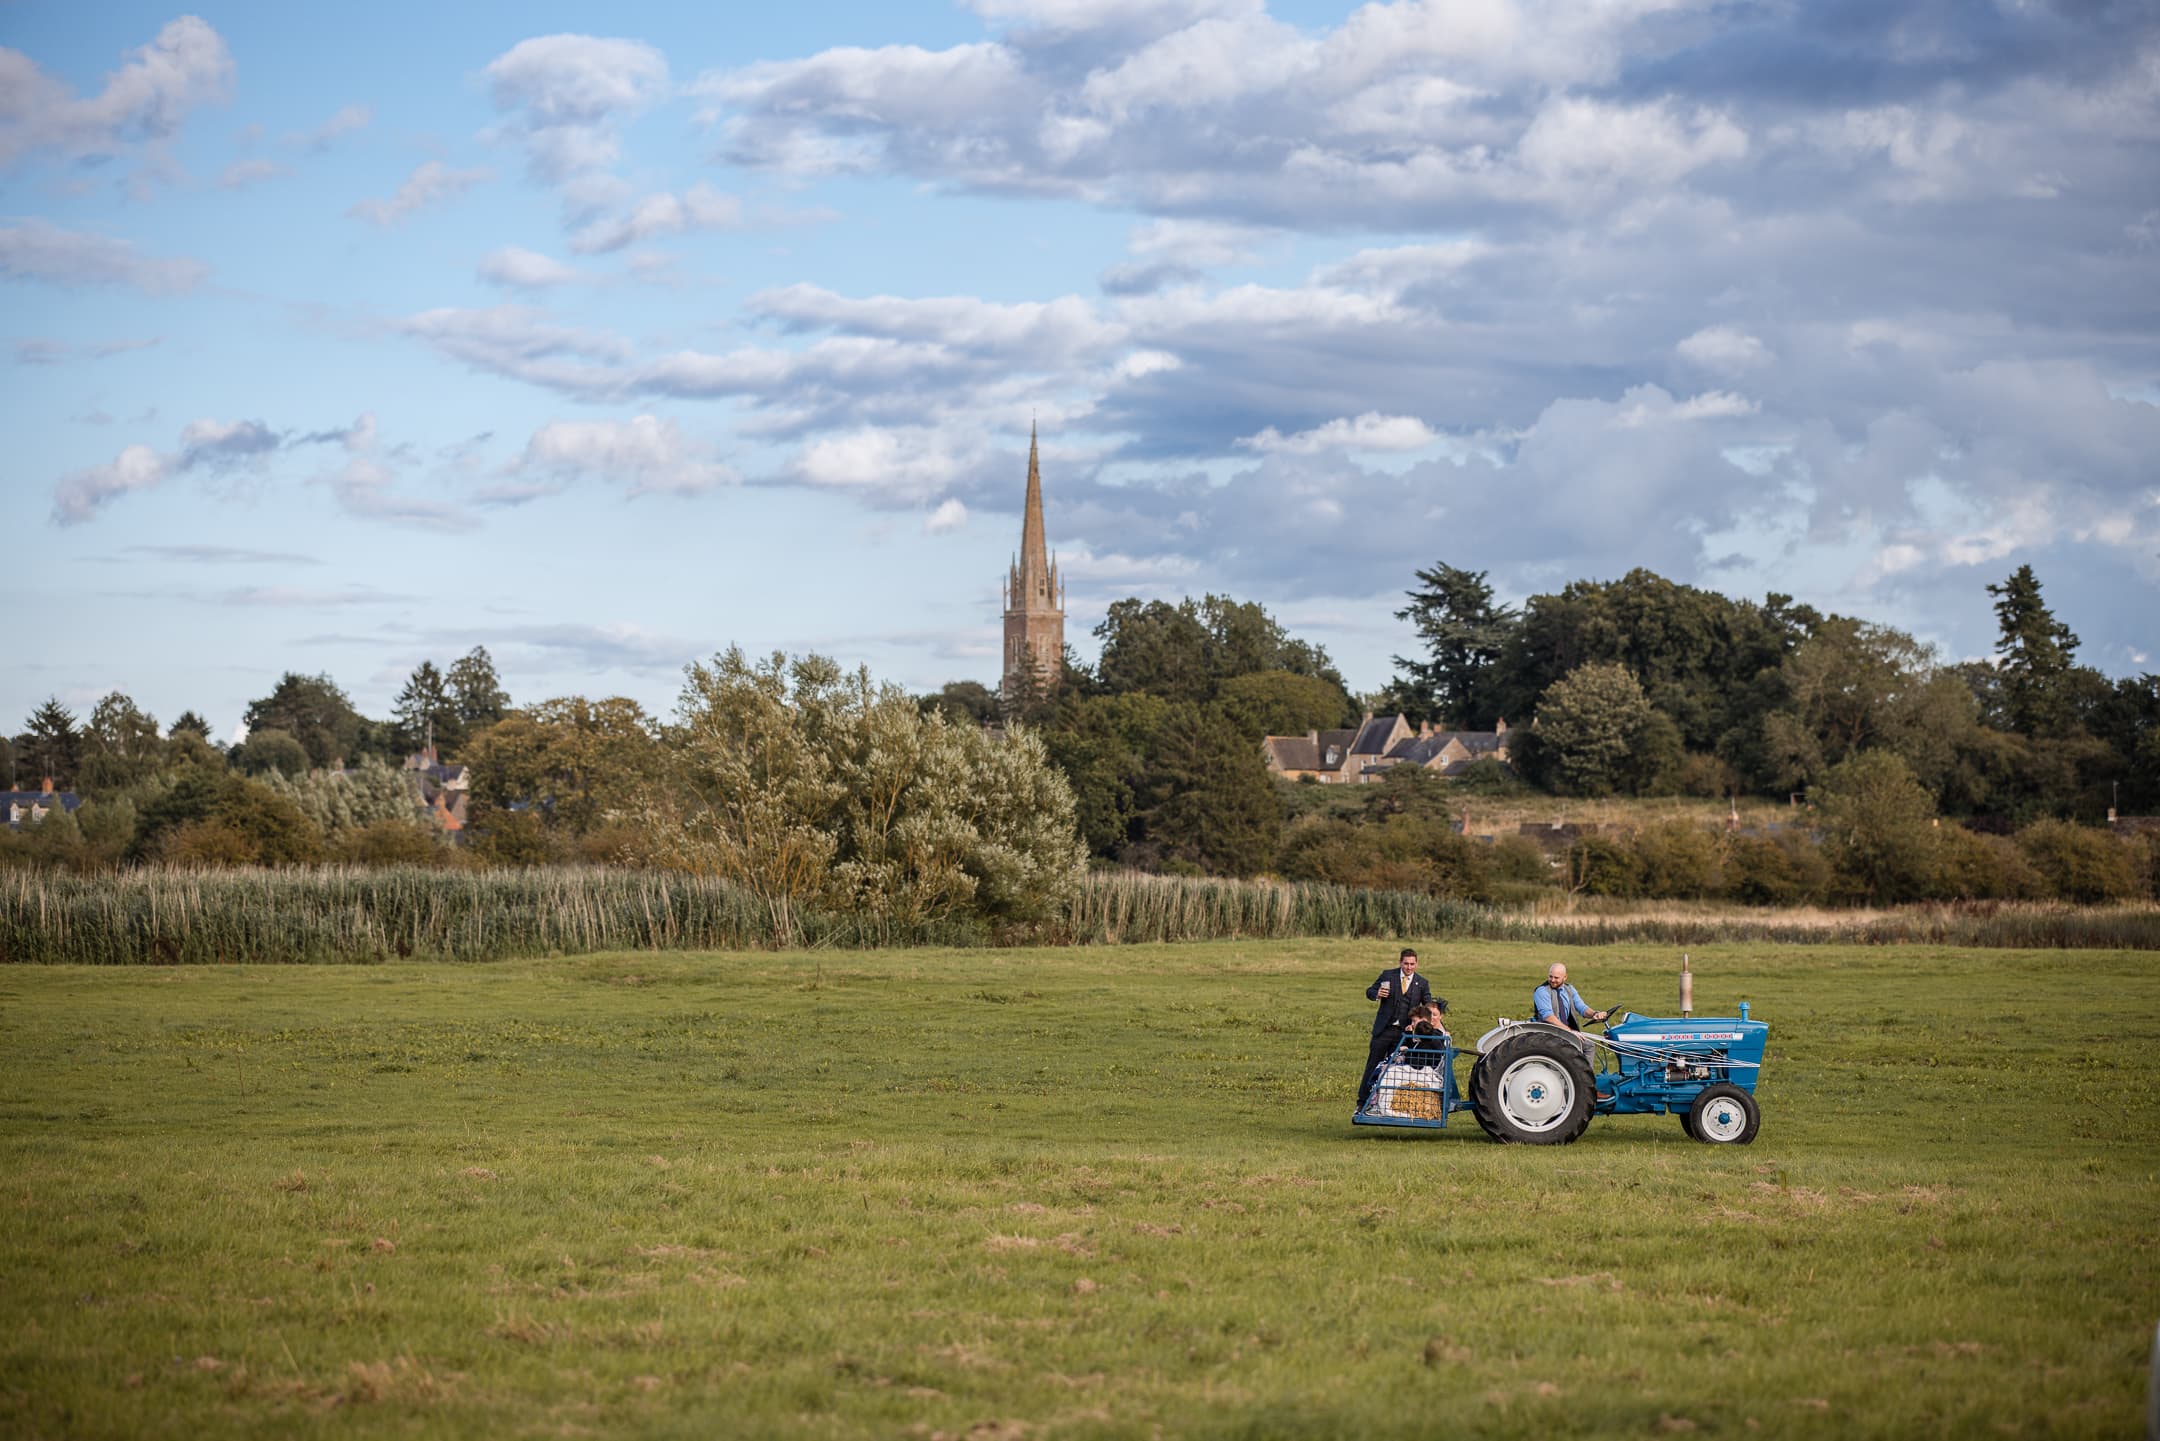 Testing out the tractor with guests at Dovecote Barn Wedding, with King Sutton Church Spire in the background